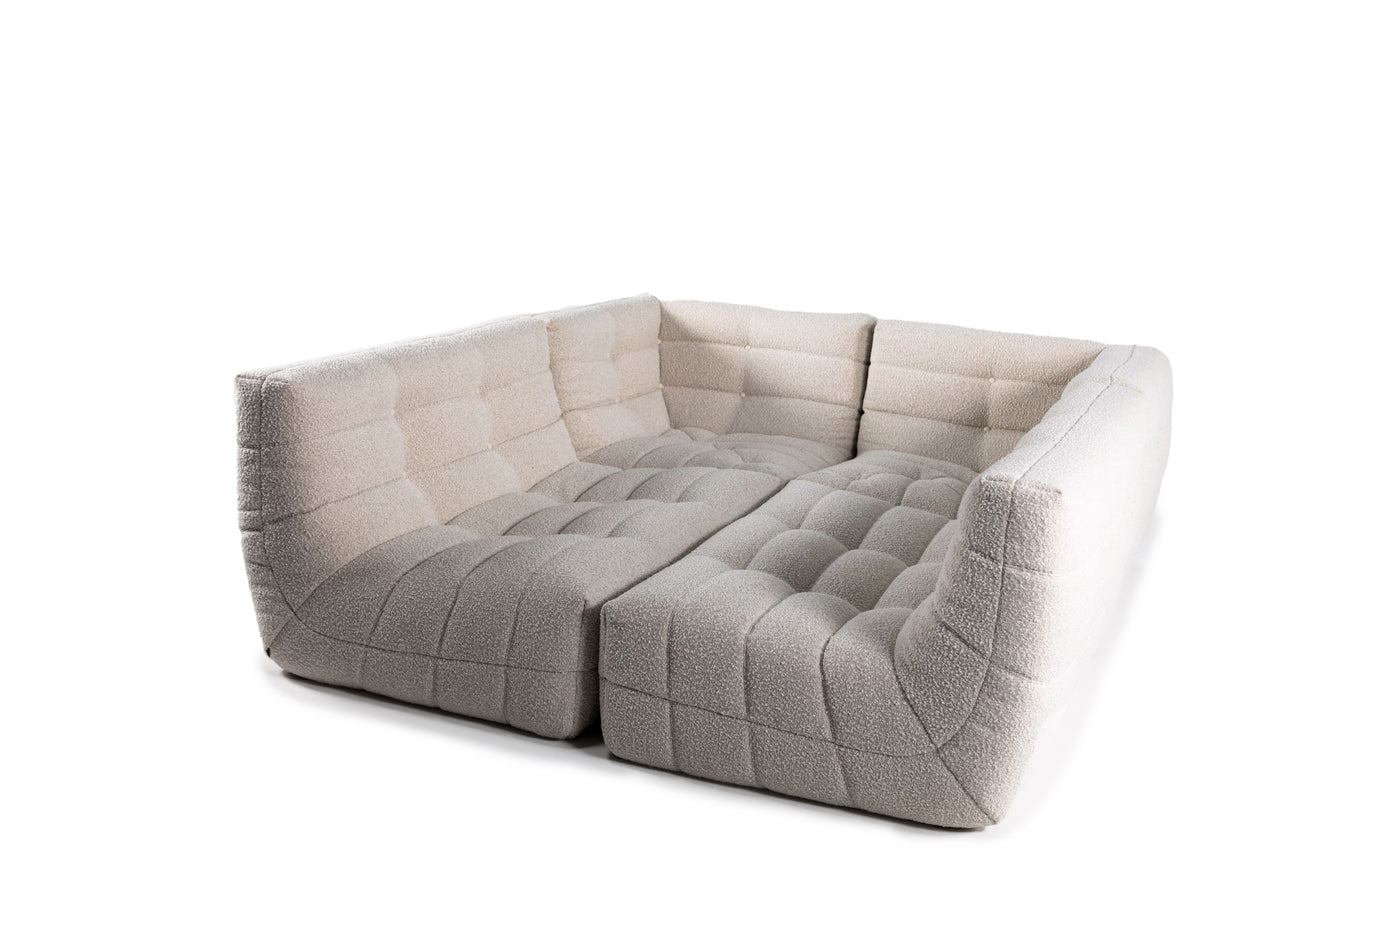 Russo2 (4 piece L & day bed / sofa)